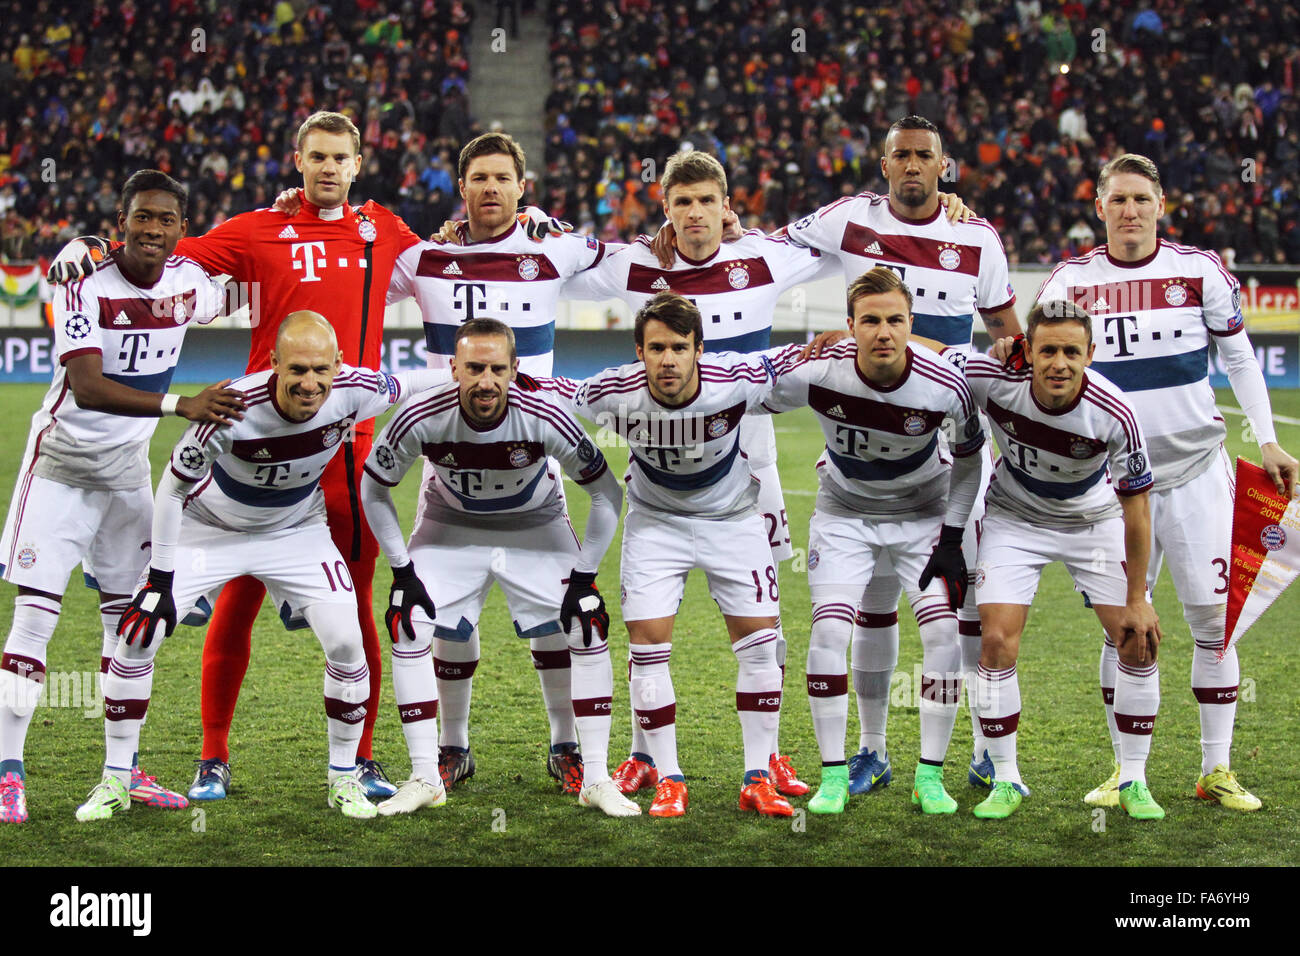 LVIV, UKRAINE - FEBRUARY 17, 2015: FC Bayern Munich players pose for a group photo before UEFA Champions League game against FC Stock Photo